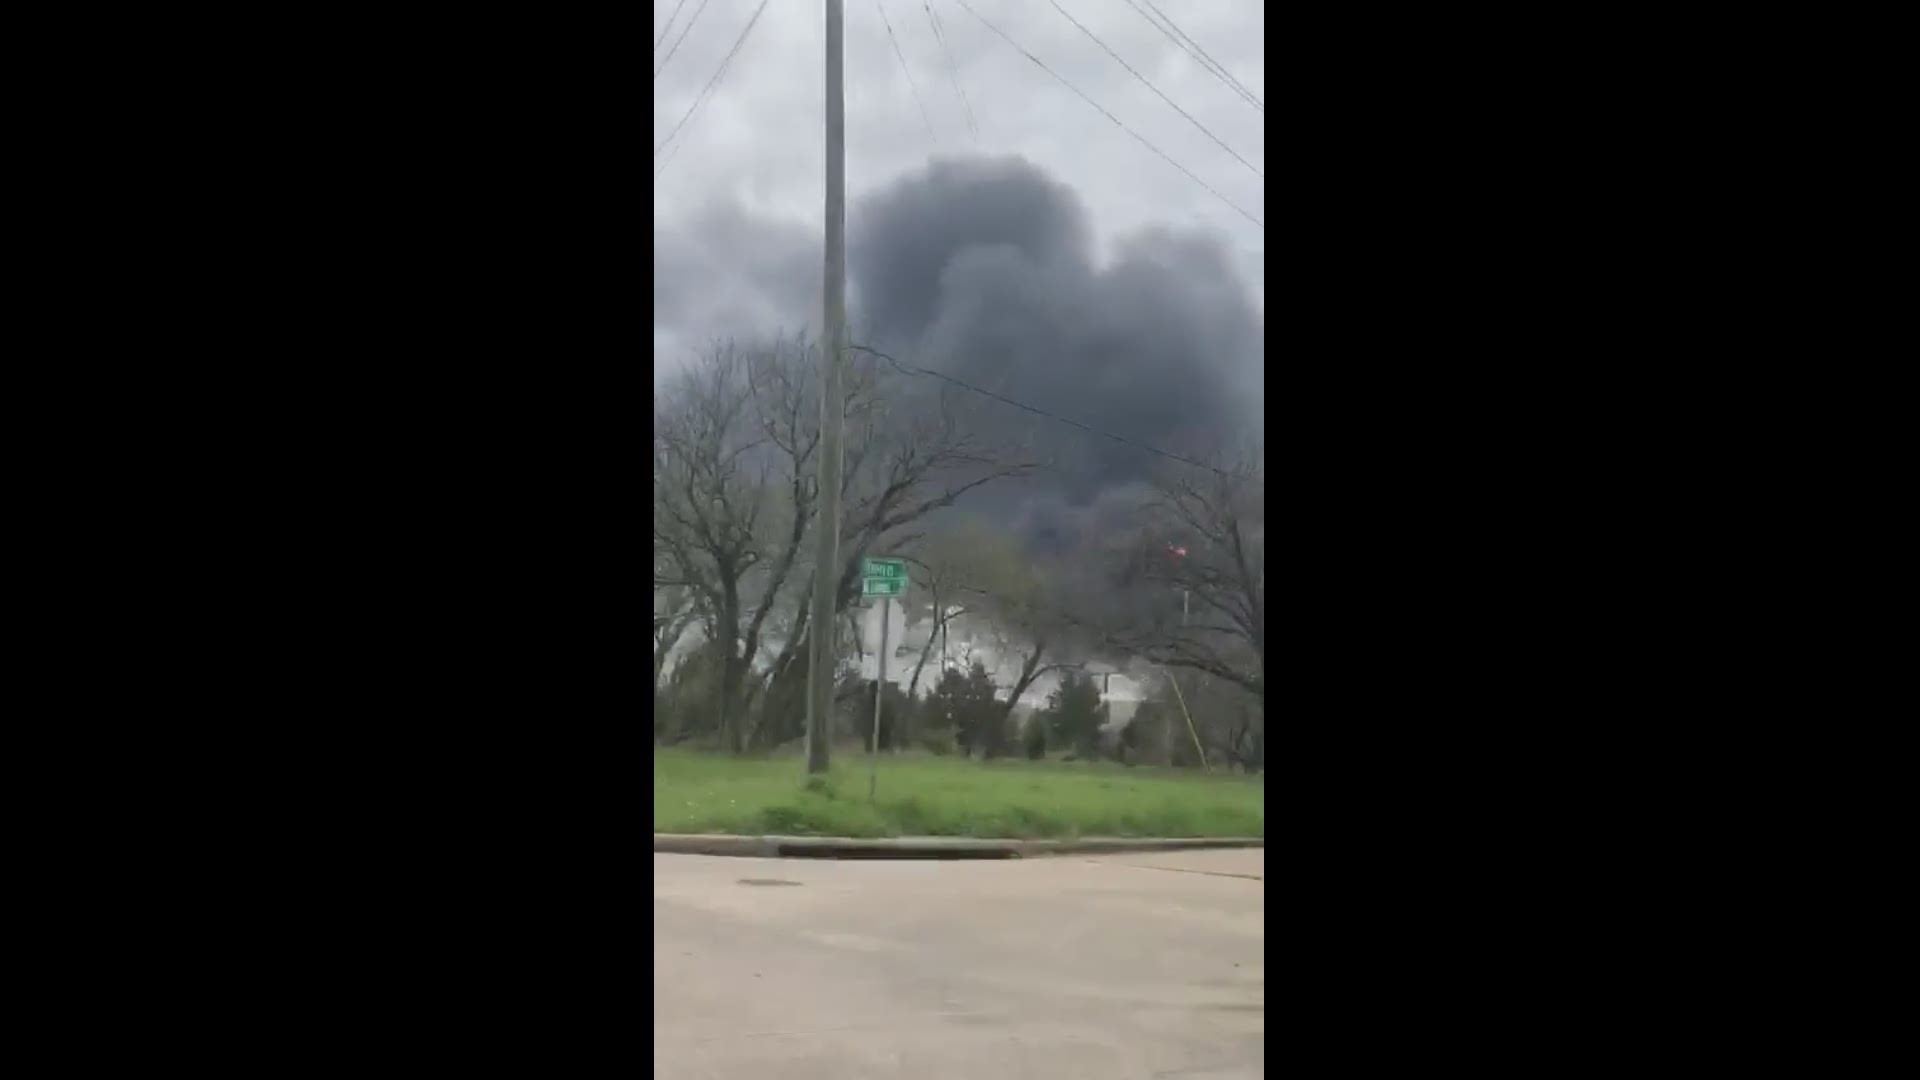 Baytown police confirm a fire at the ExxonMobil plant. Viewers say they can see the large cloud of smoke from miles away.